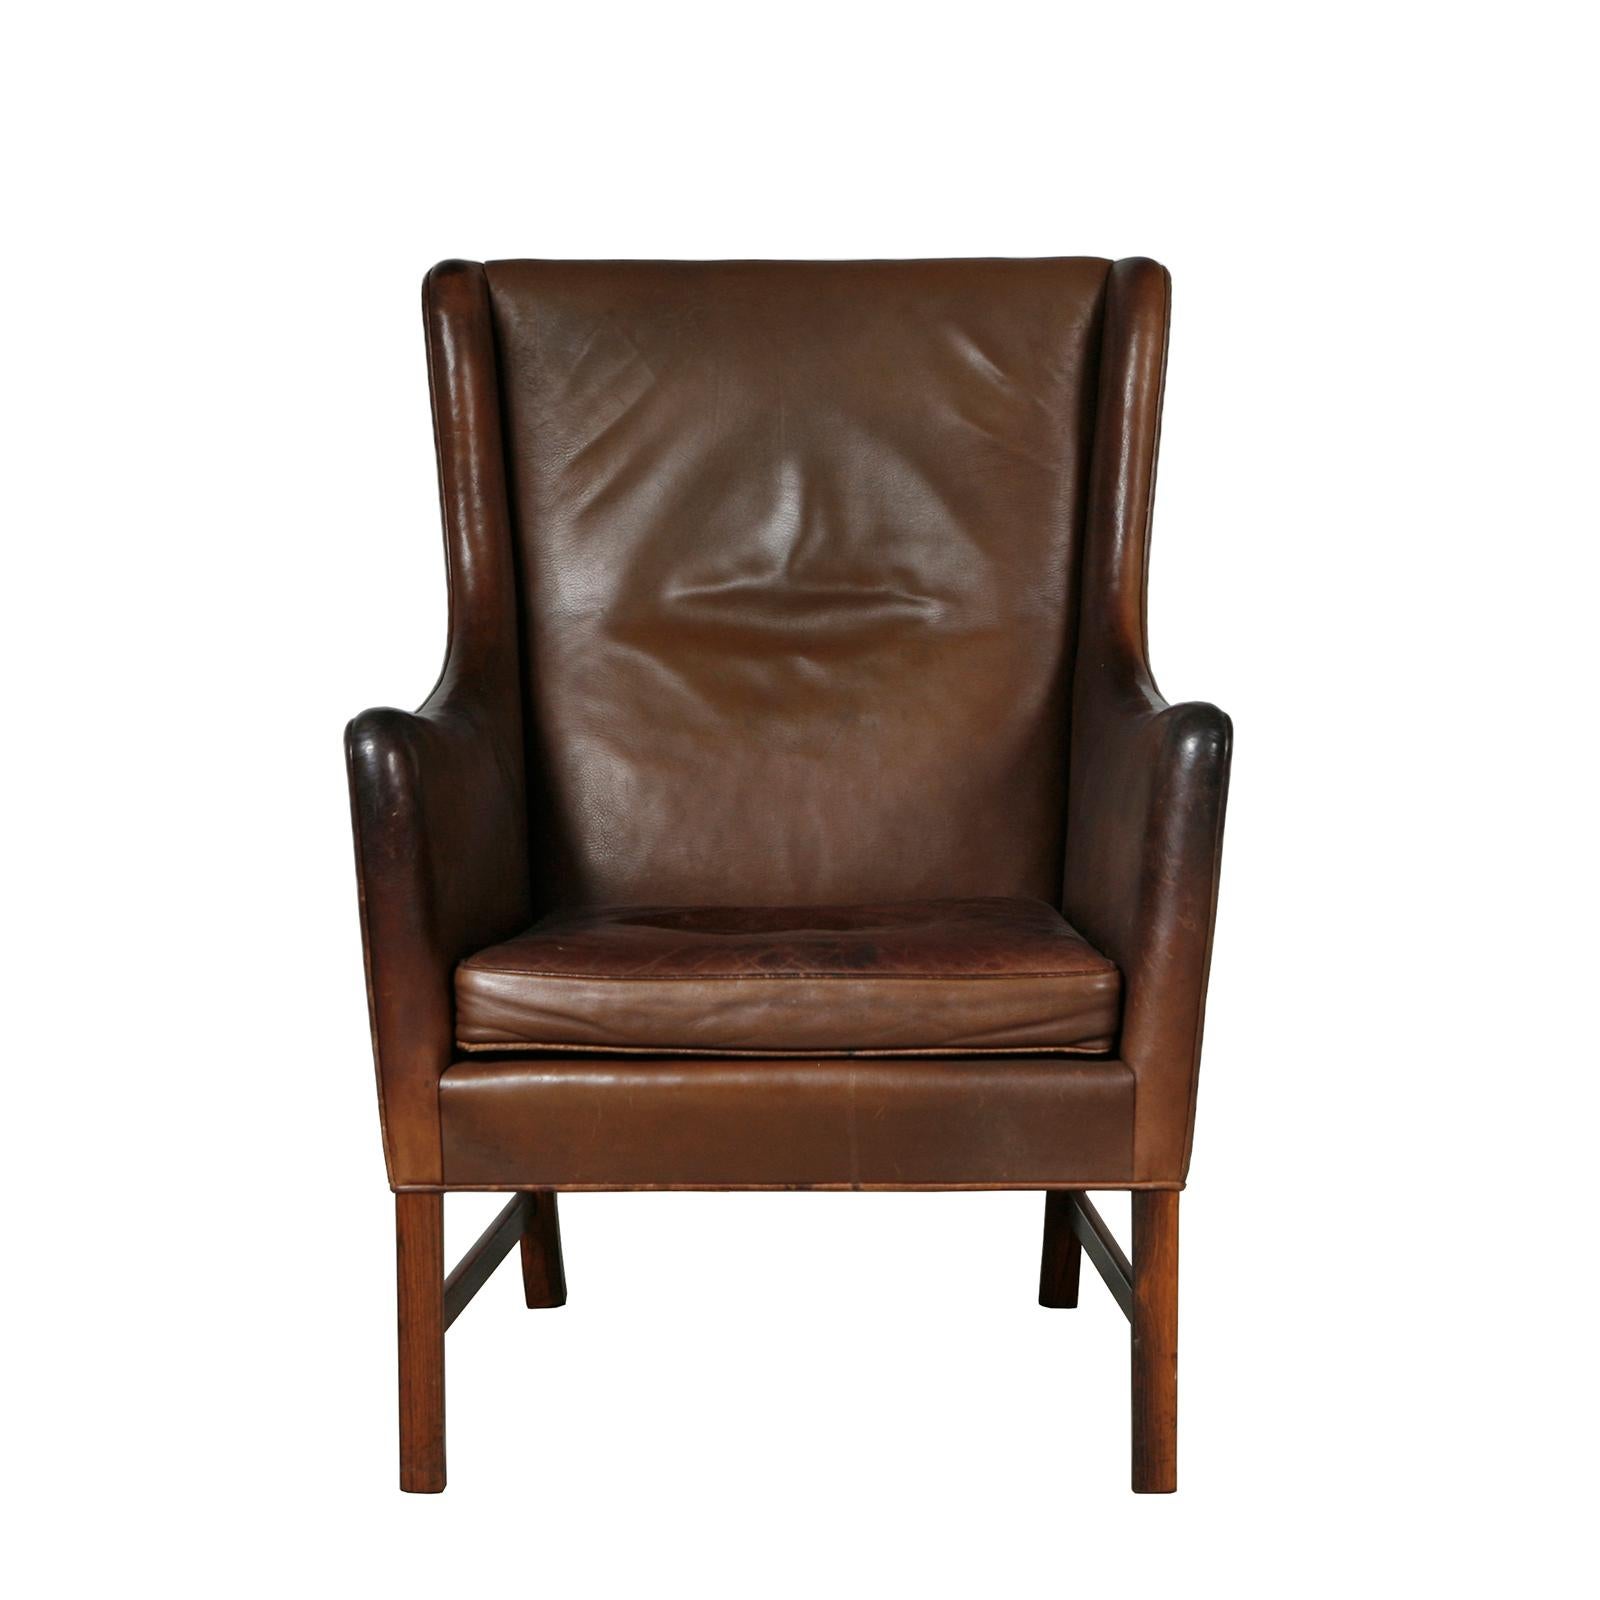 This pair of elegant high-back lounge chairs retain the original deep brown leather which is in excellent condition and has a beautiful patina. The bases are made of Brazilian rosewood. Designed by Ole Wanscher in 1960 and exeuted by master